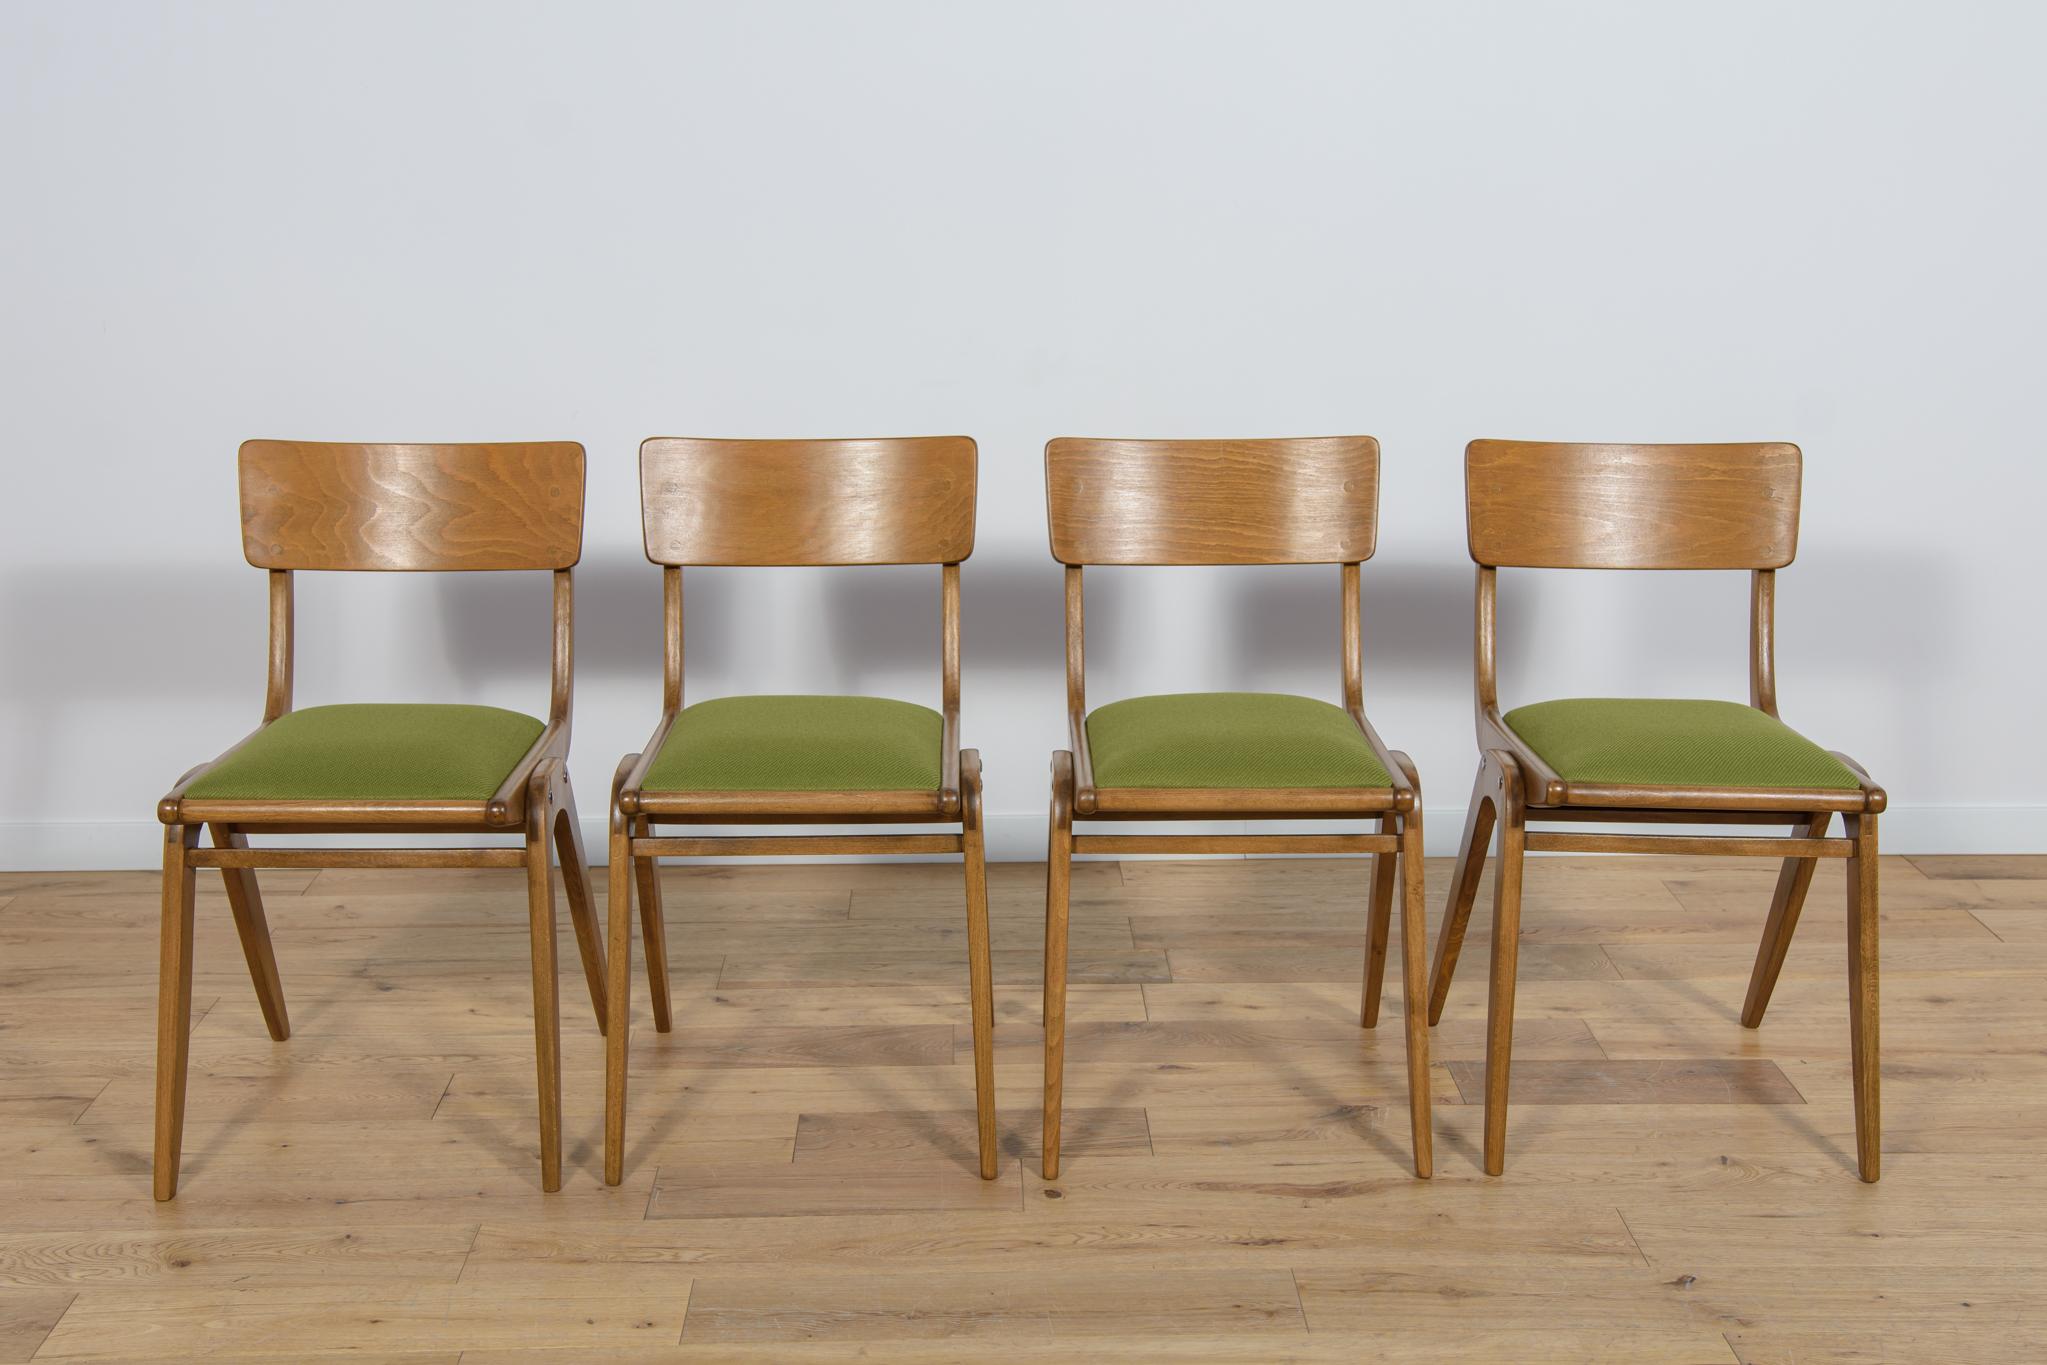 Set of 4 Polish dining chairs model Boomerang 229XB from Gościcińskie Furniture Factory in the 1960s. The frame of the chairs is made of beech wood. Wooden elements cleaned from the old surface, painted with oak-colored stain and finished with a